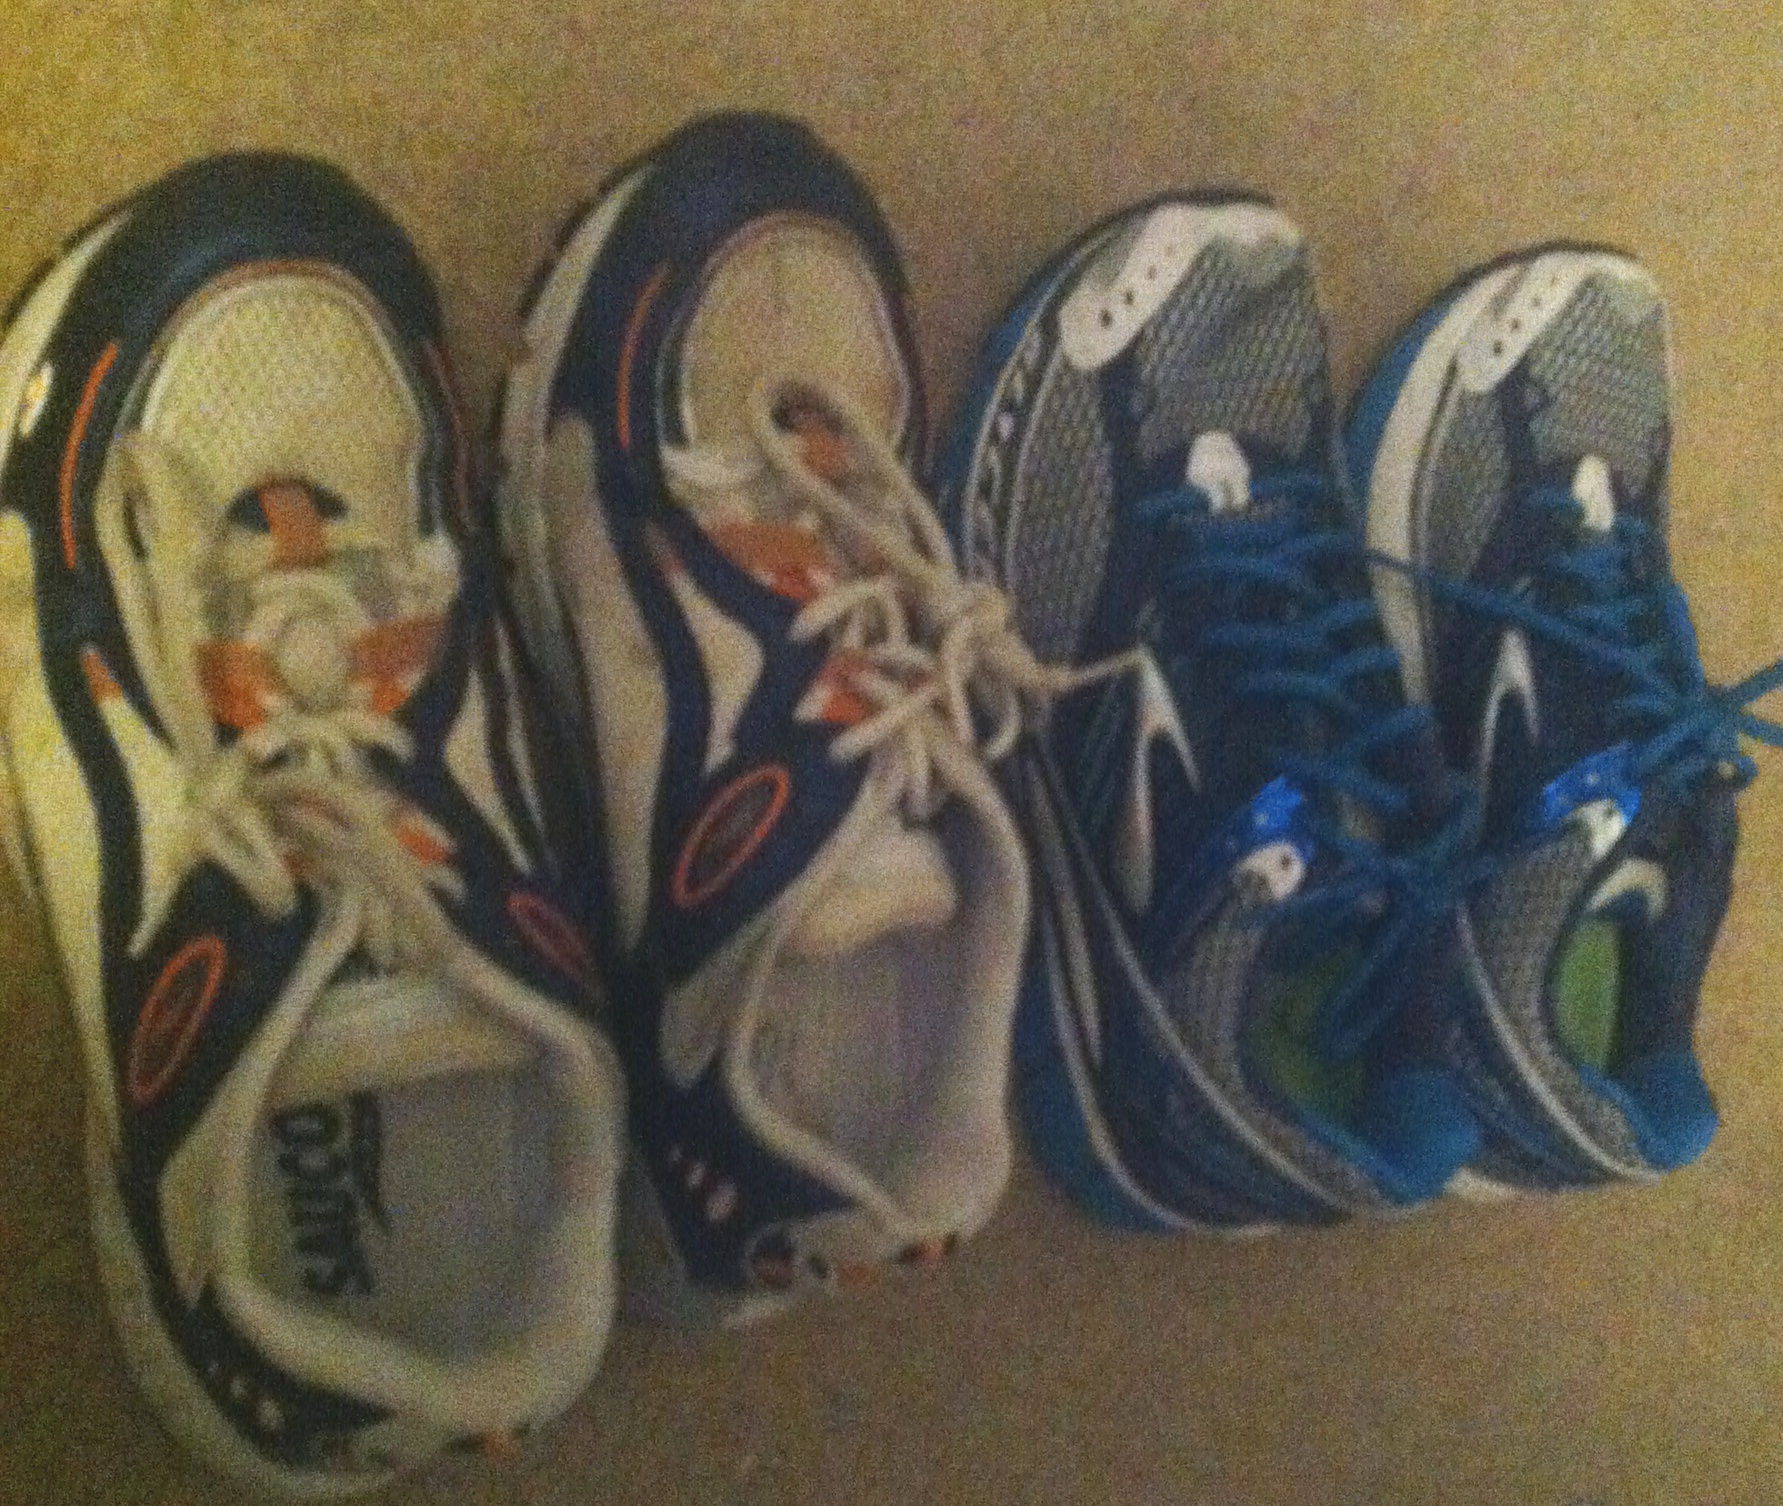 Old (left) and new (right) running shoes.